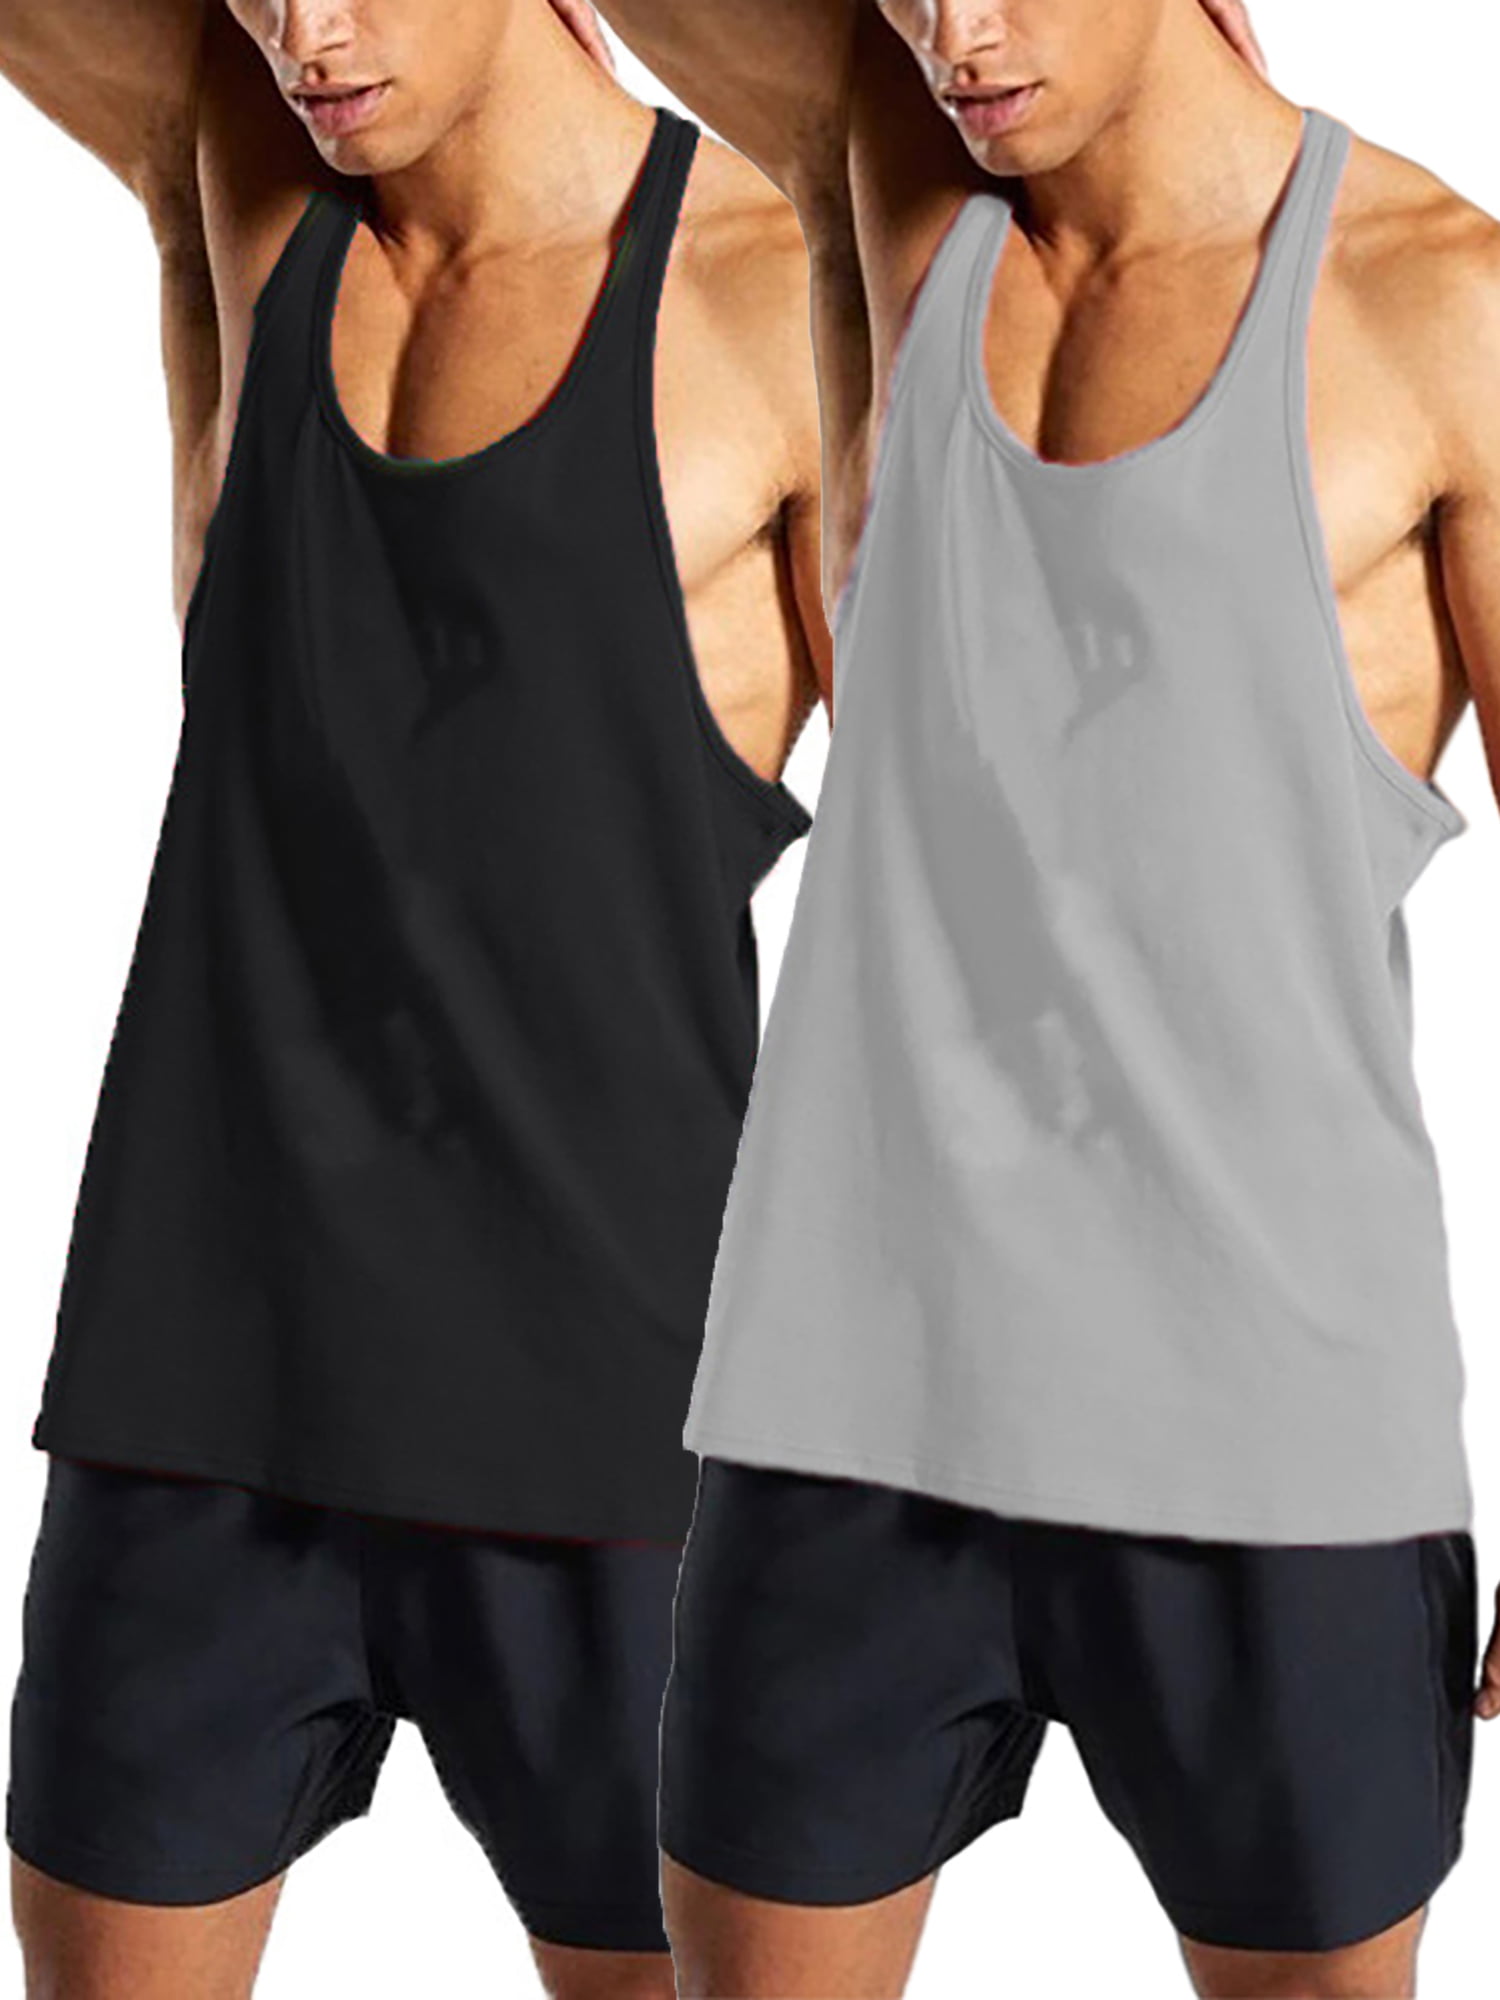 Mens Cotton Workout Tank Tops Dry Fit Gym Bodybuilding Training Fitness Sleeveless Muscle T Shirts